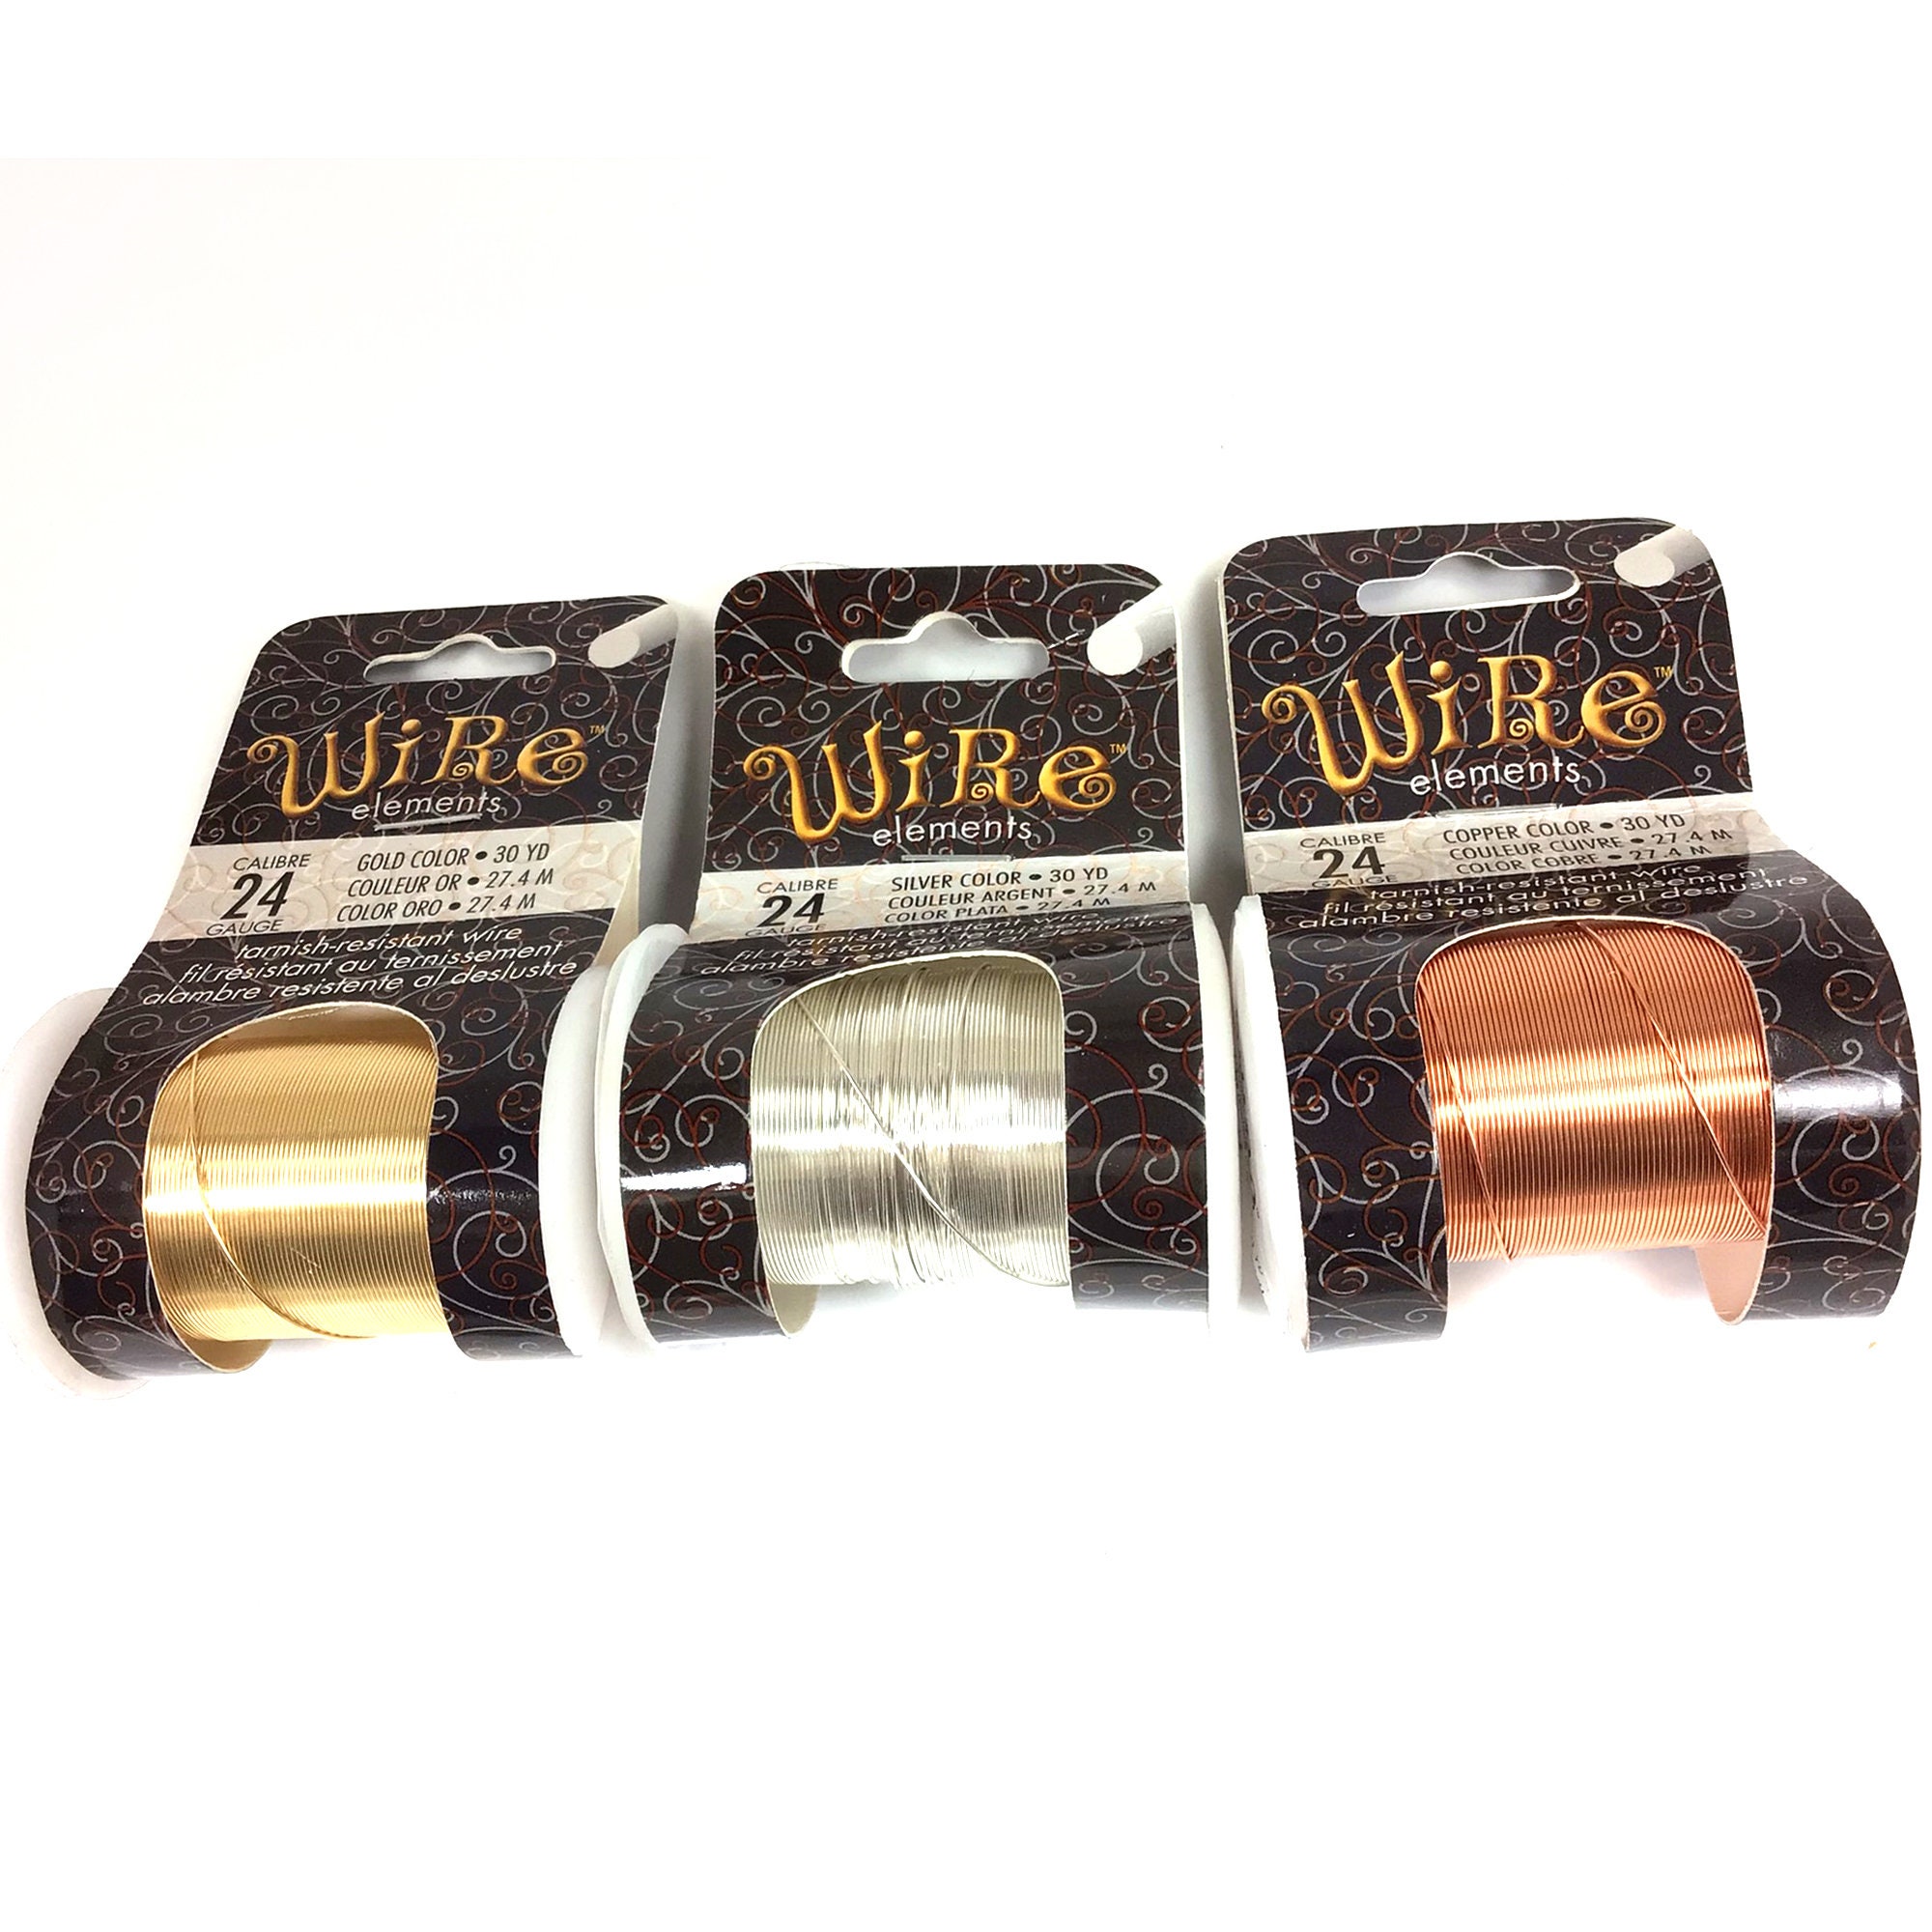 Craft Wire 24 Gauge GOLD PLATED 10 Yards by BeadSmith